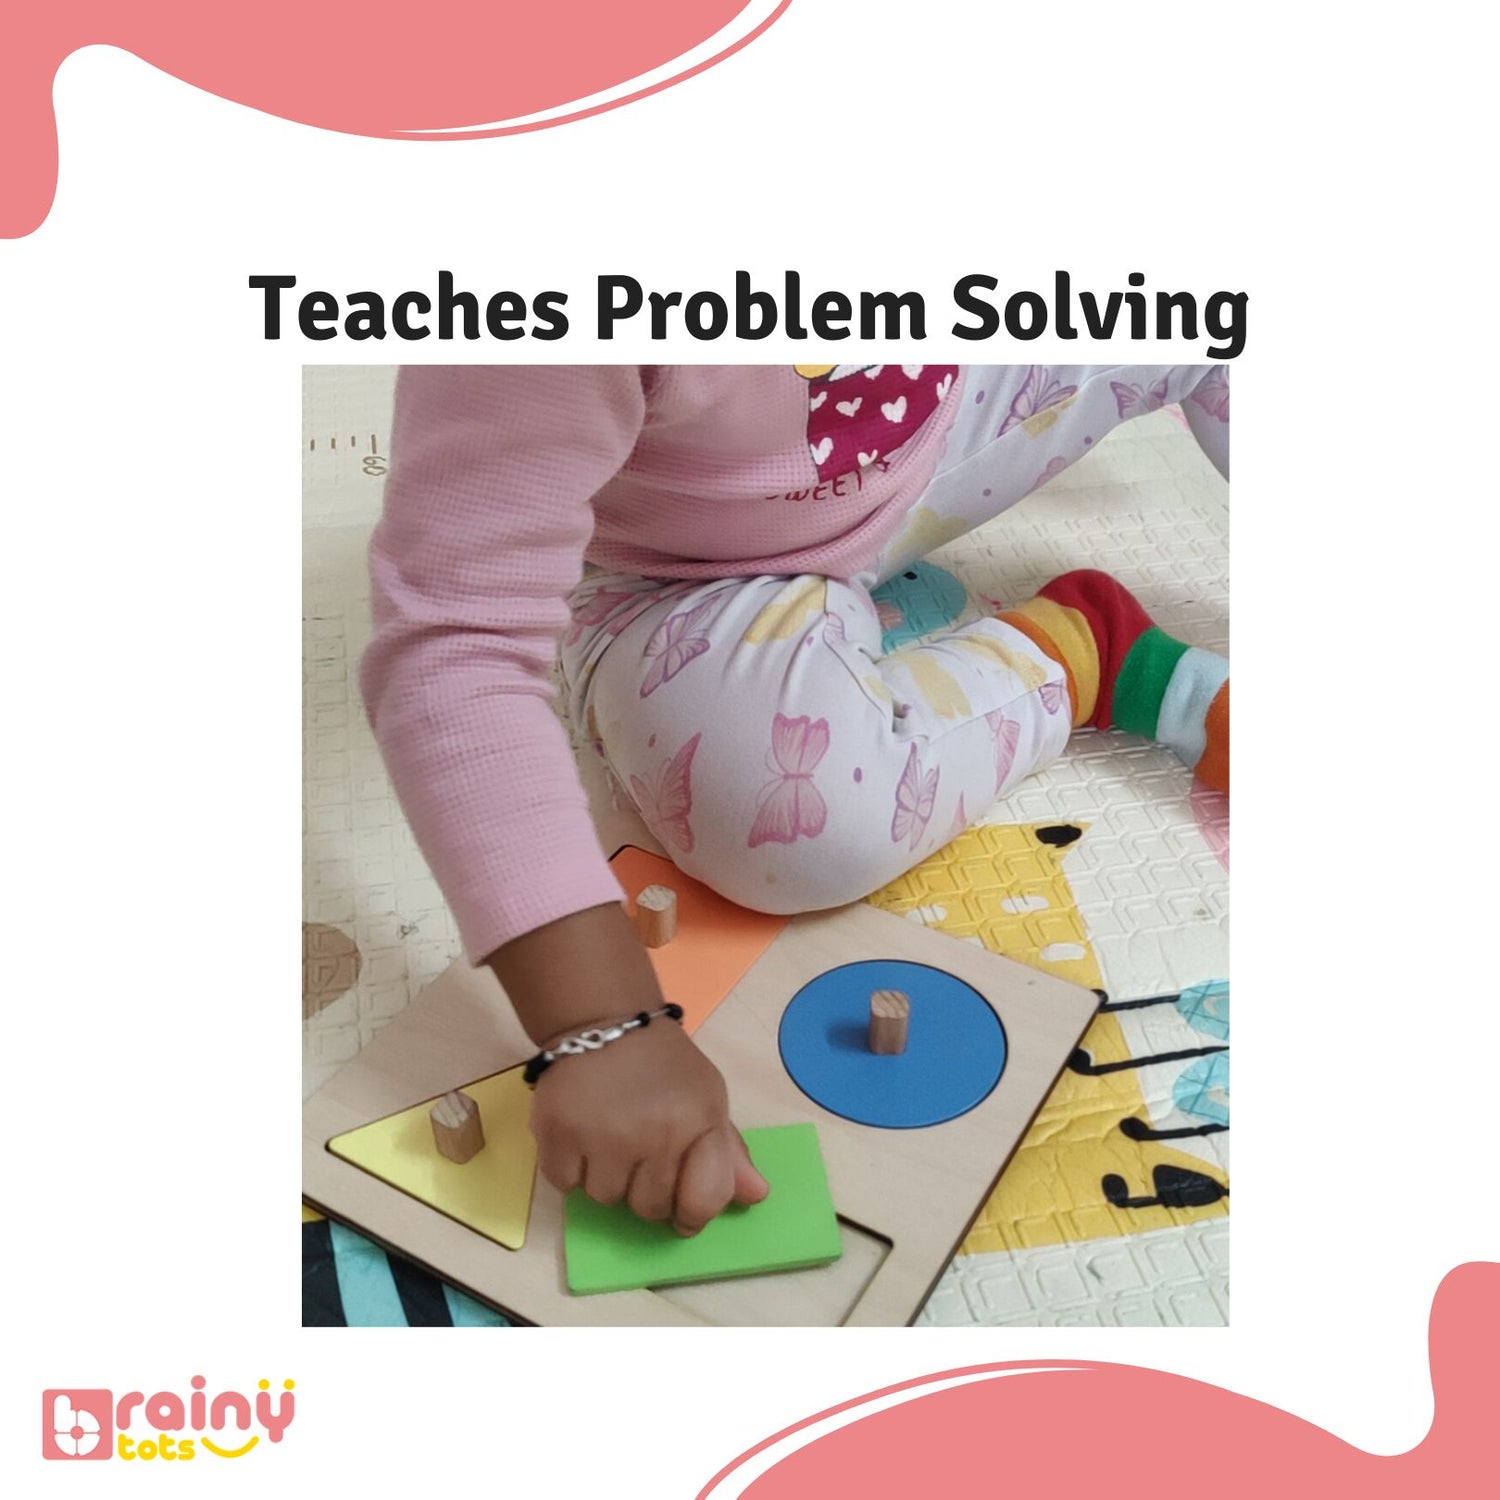 Teach problem-solving skills with our 4 Shapes Puzzles. Through hands-on manipulation and trial-and-error, these puzzles challenge learners to find solutions, fostering critical thinking and problem-solving abilities essential for academic and real-life success.